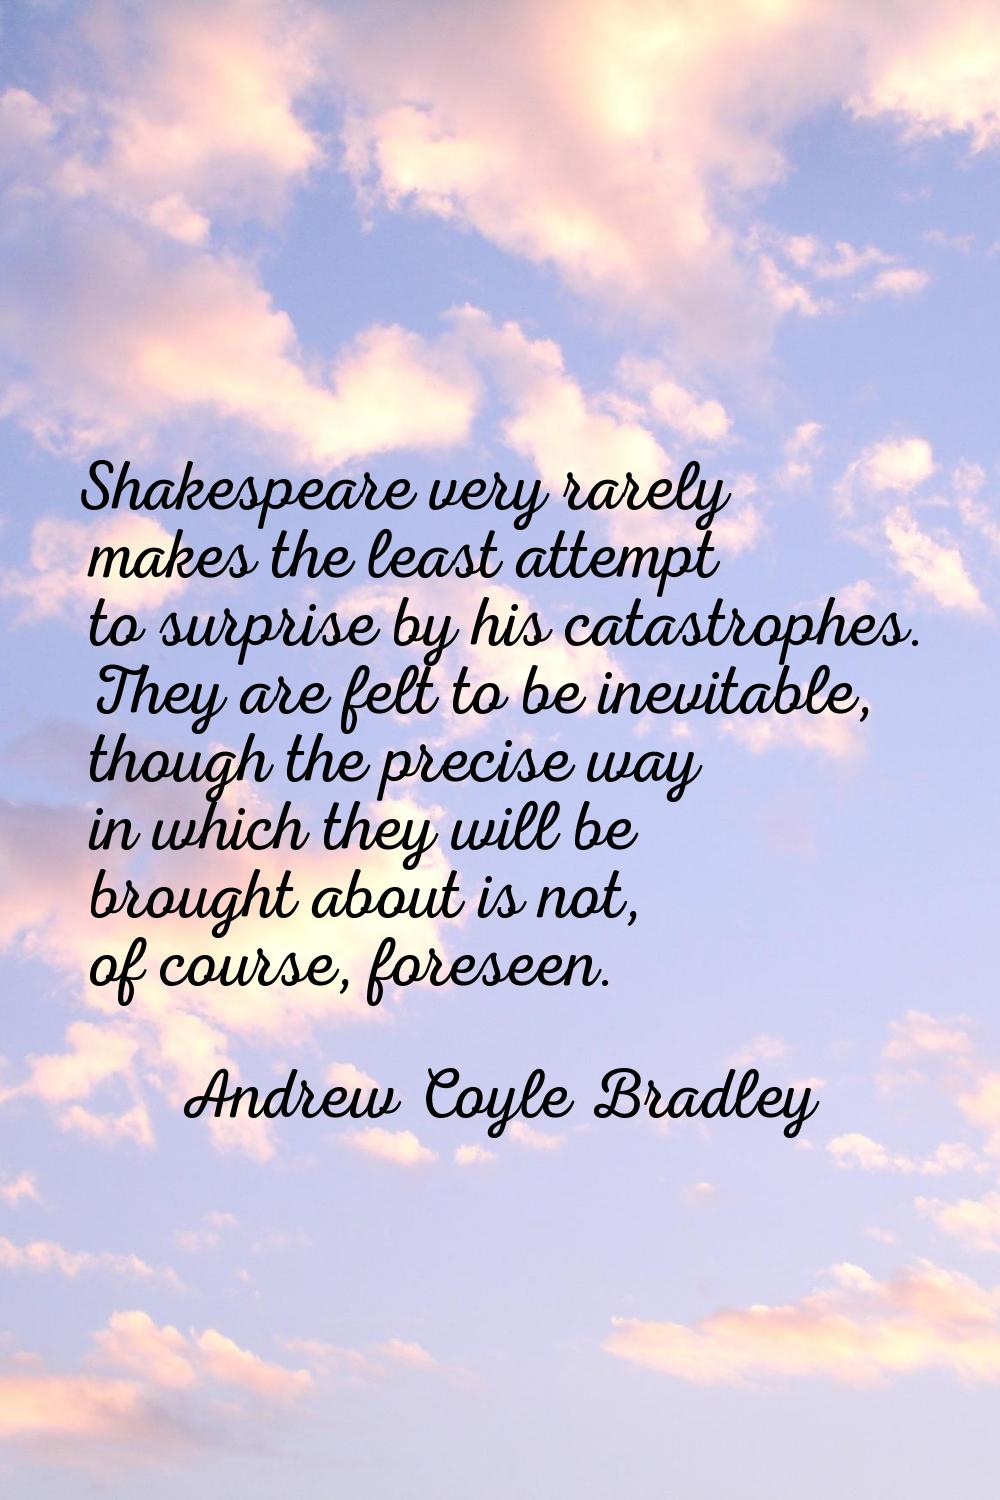 Shakespeare very rarely makes the least attempt to surprise by his catastrophes. They are felt to b